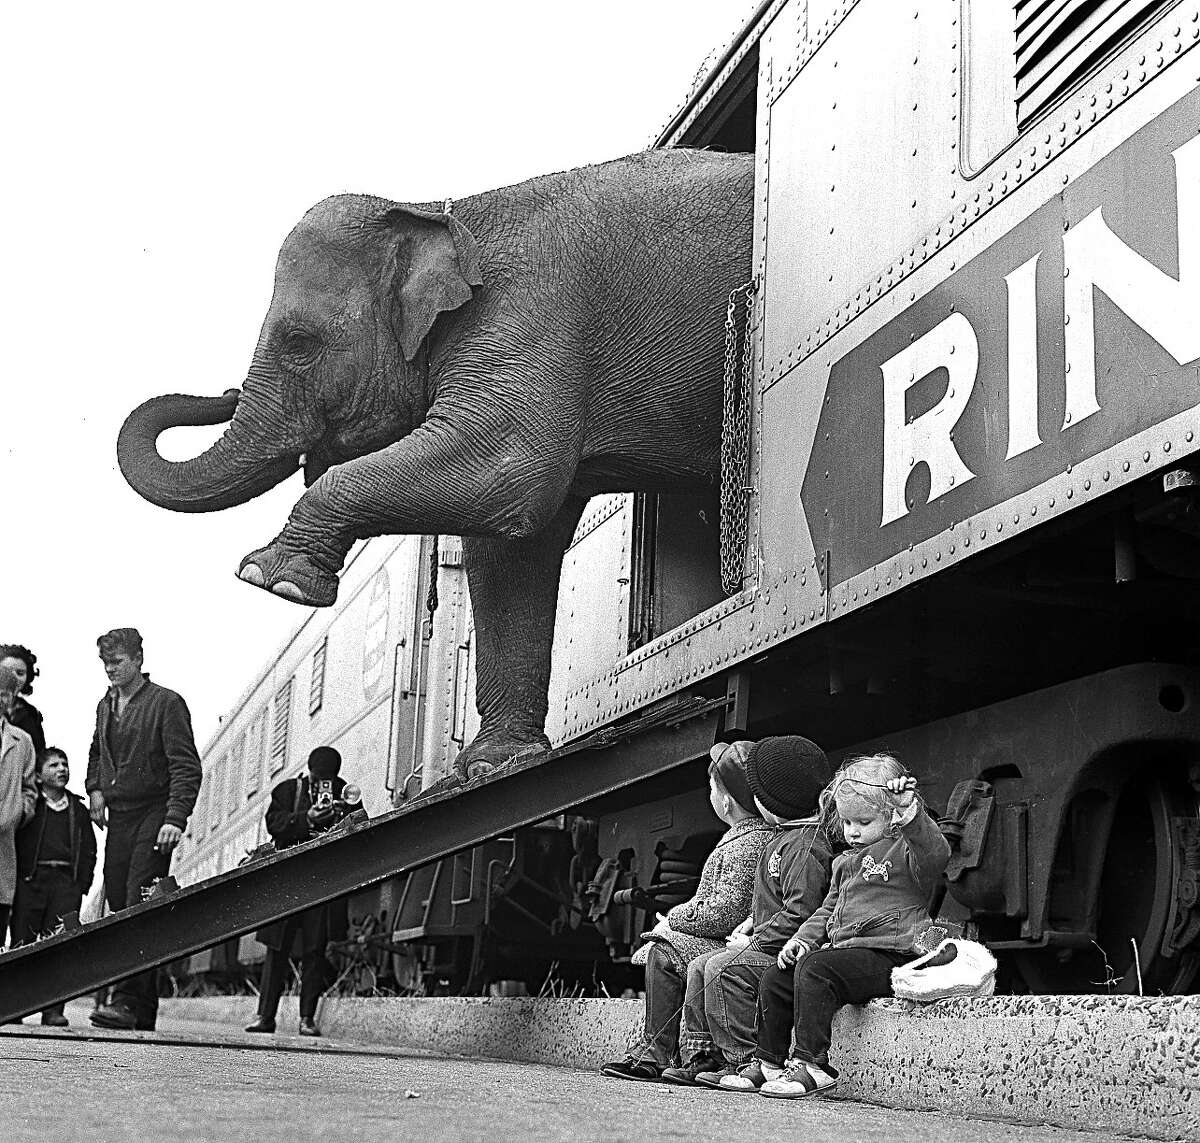 In this April 1, 1963, file photo, a Ringling Bros. Circus elephant walks out of a train car as young children watch in the Bronx railroad yard in New York. The Ringling Bros. and Barnum & Bailey Circus is drawing to a close this month, May 2017, after 146 years of performances and travel.